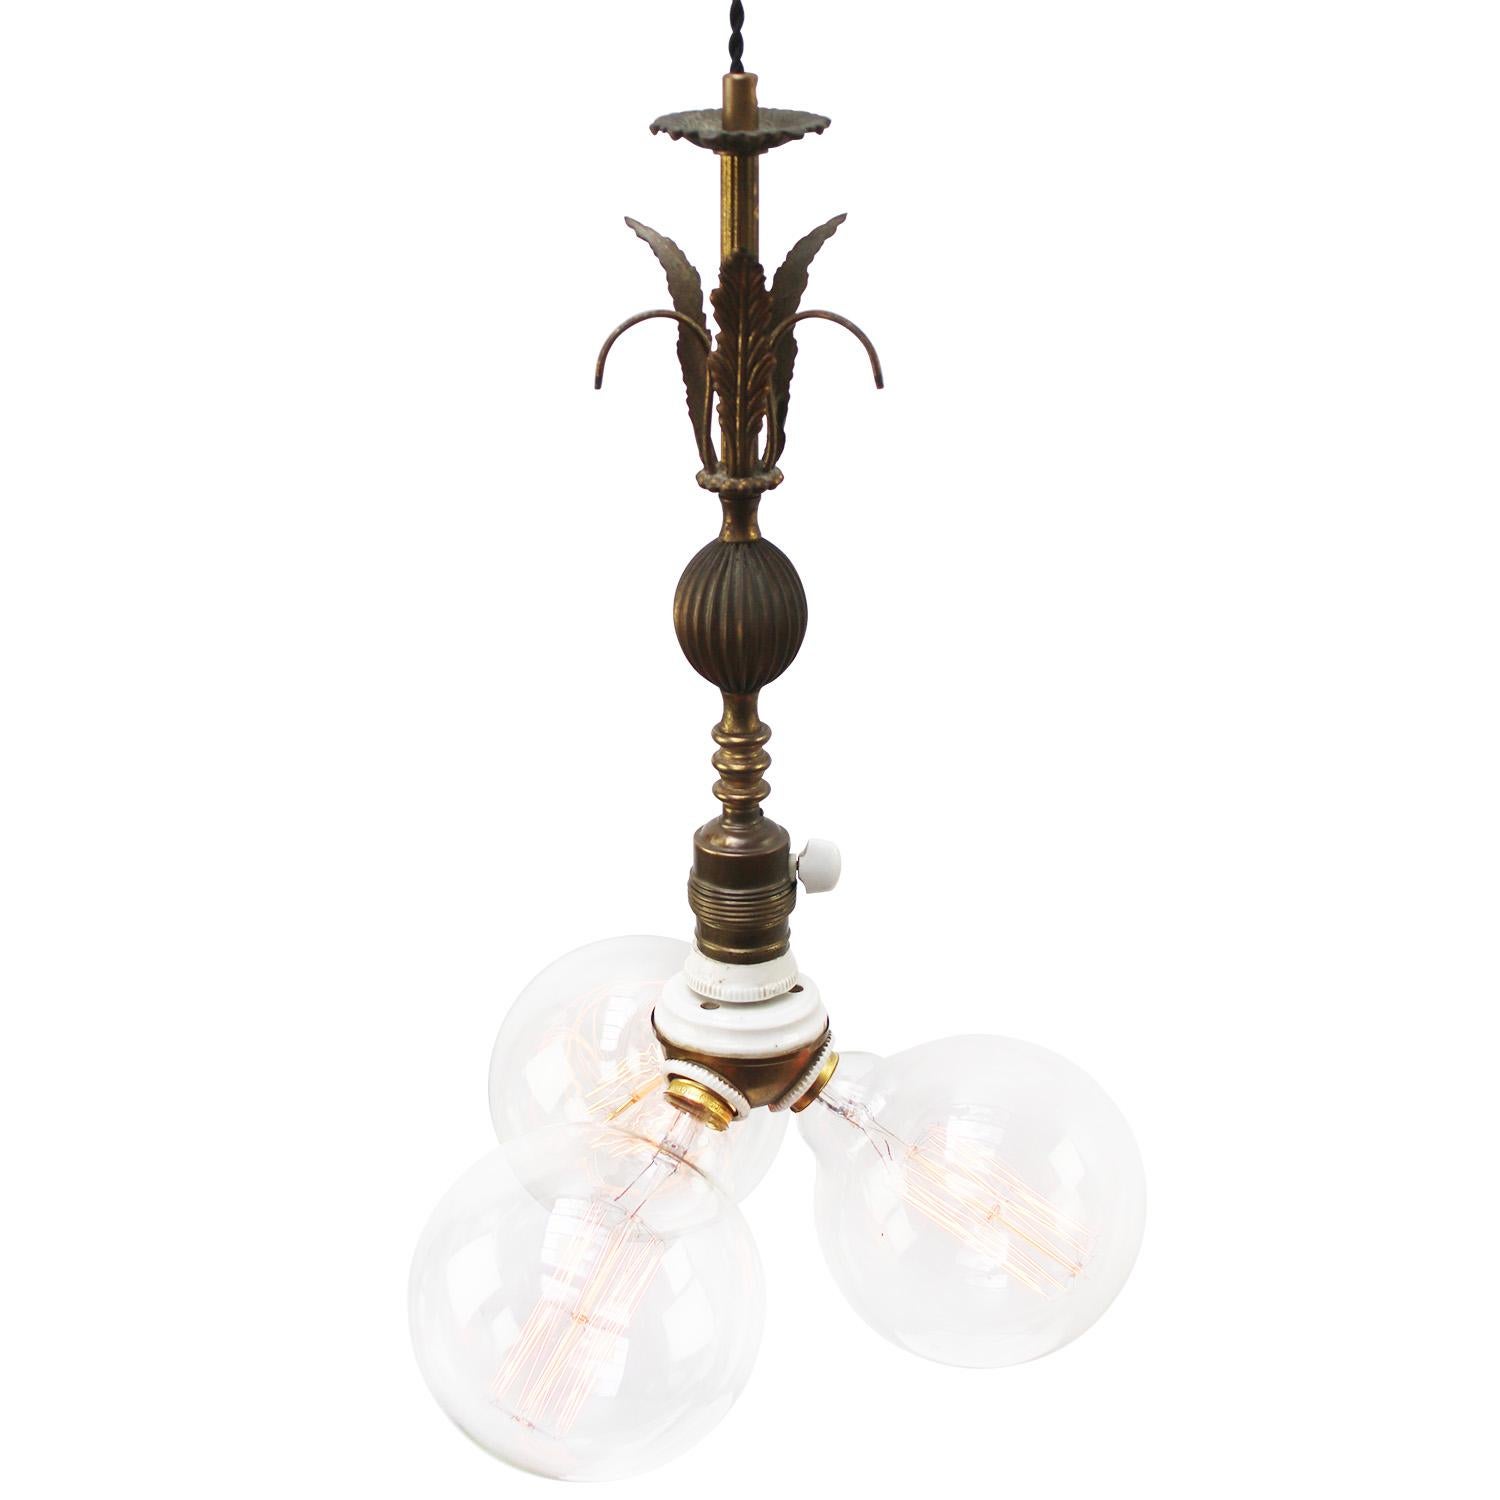 Art Nouveau French Brass & Porcelain Pendant Light In Good Condition For Sale In Amsterdam, NL